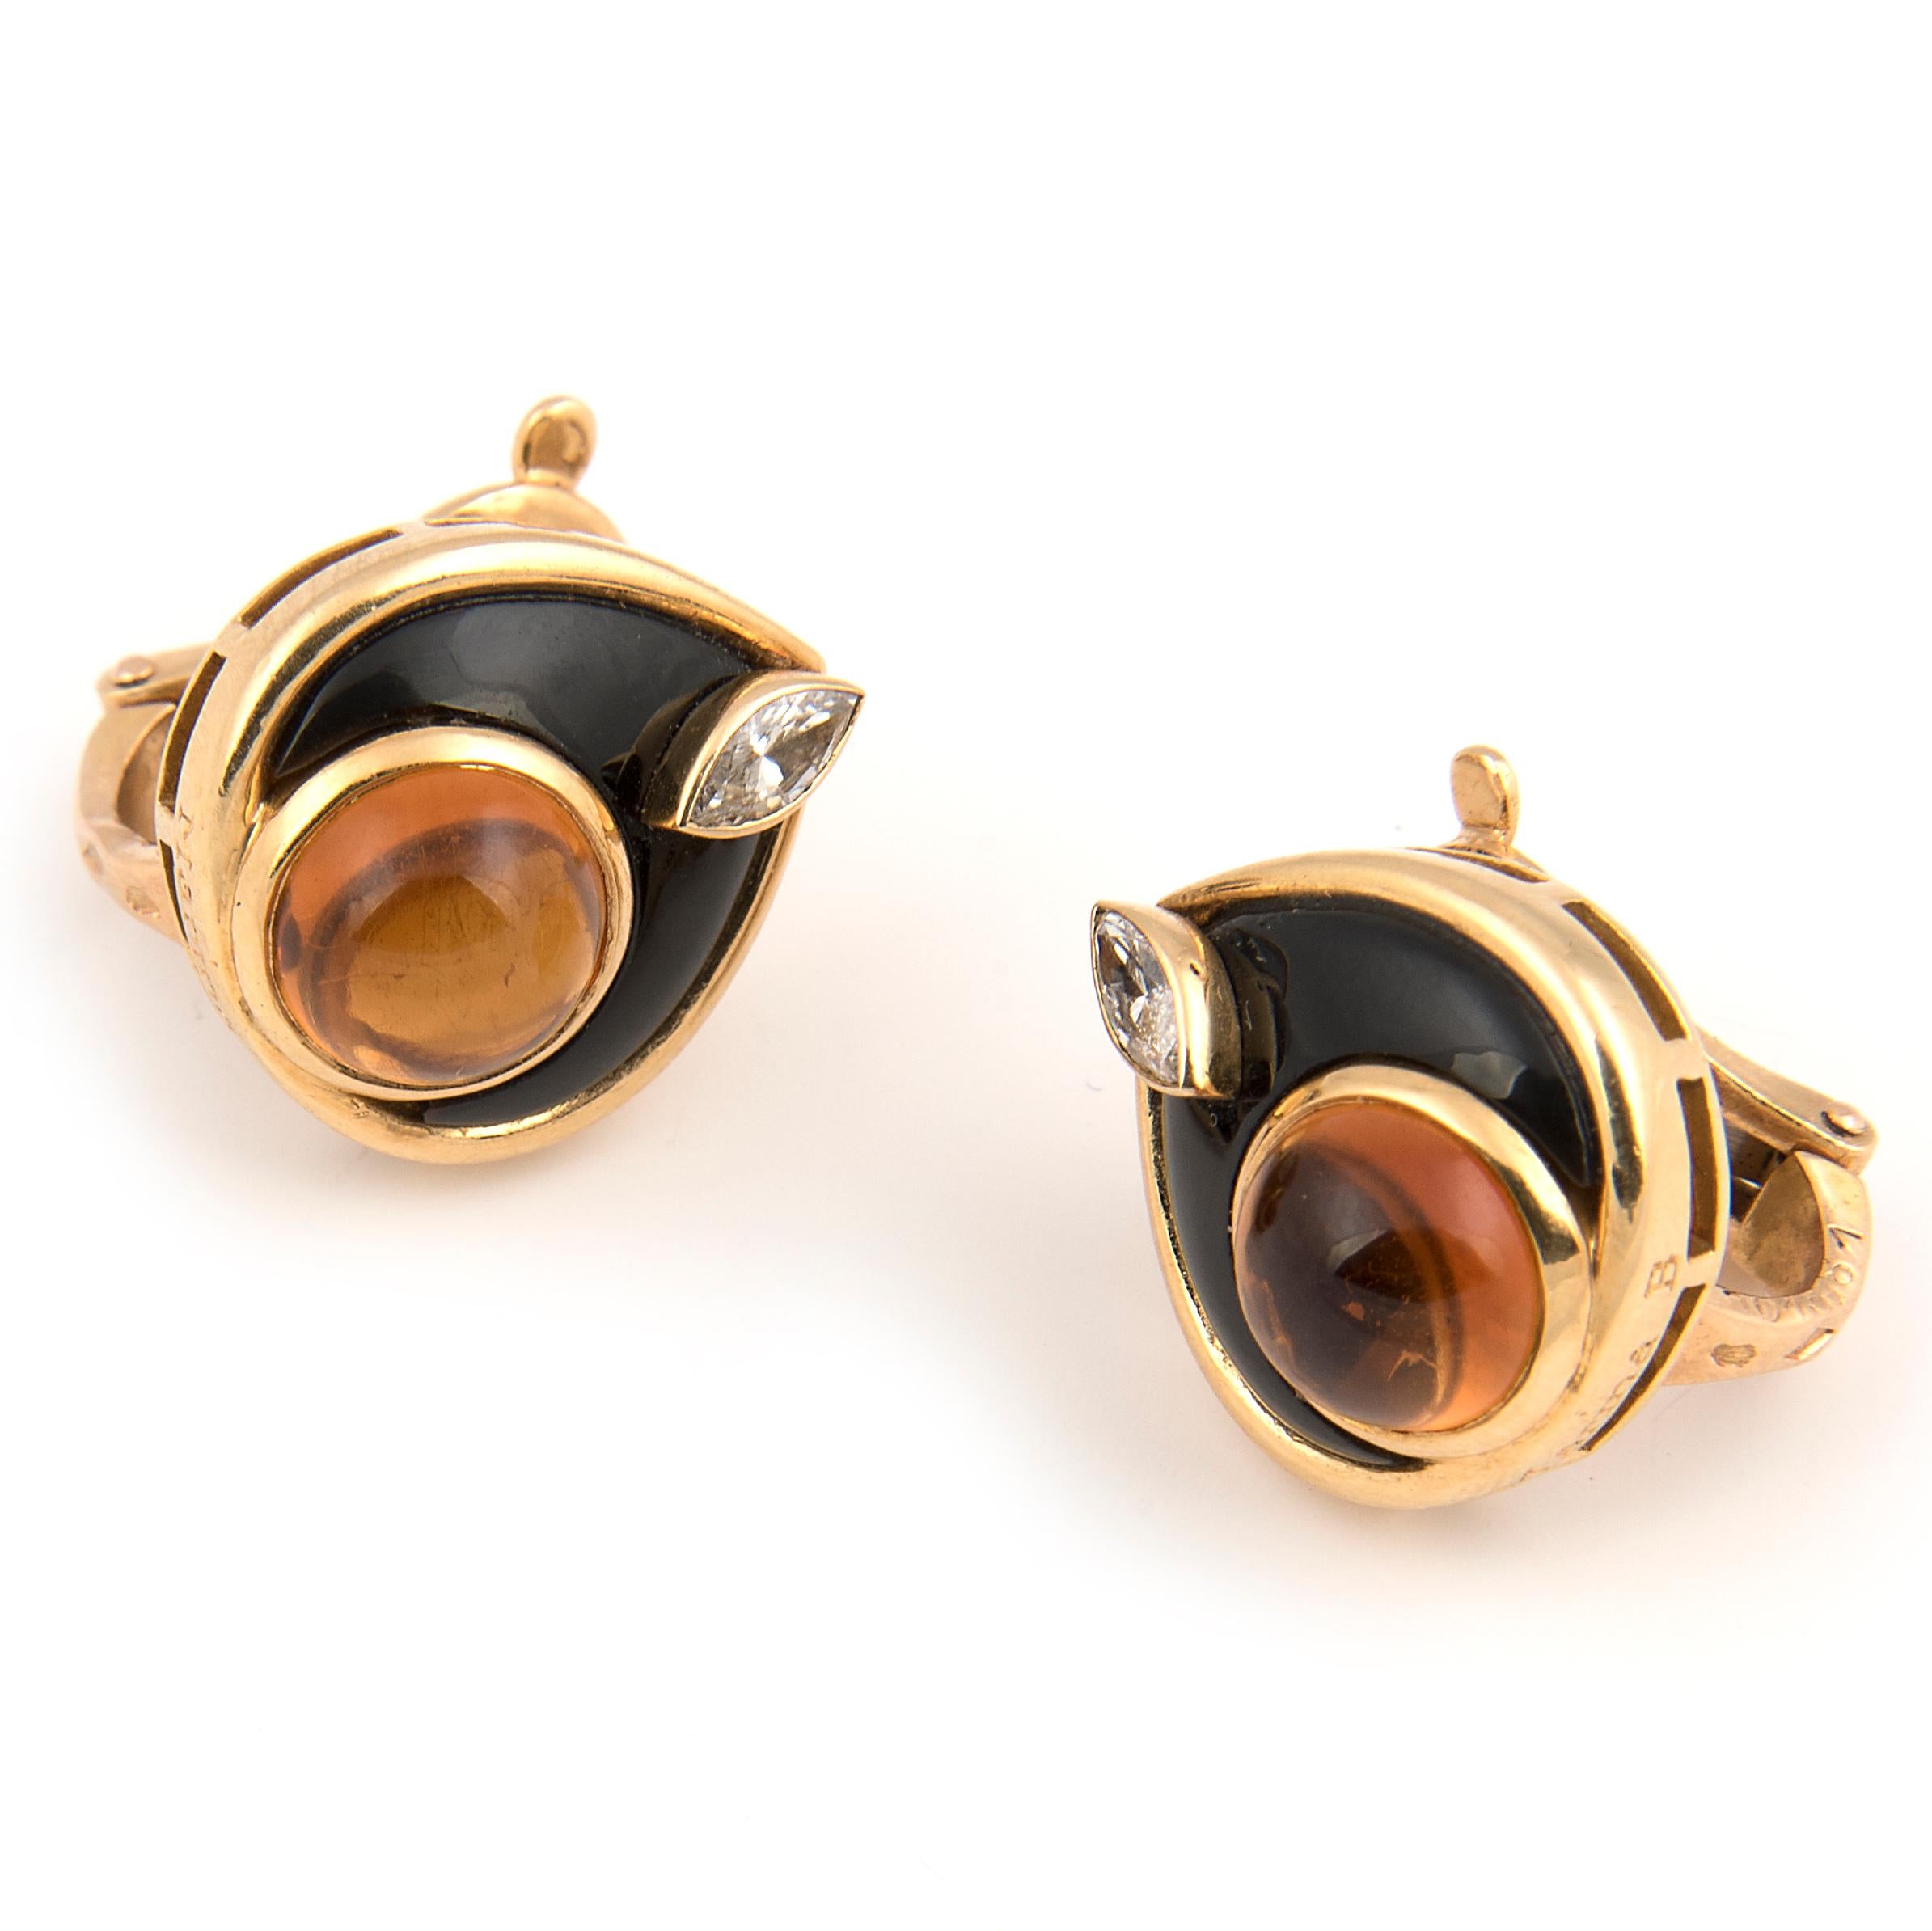 Pair of clip-on stud earrings by Marina B (Bulgari), 18kt Yellow gold with a cabochon citrine and a marquise diamond surrounded with onyx.
Signed Marina B, maker's mark, French hallmarks and numbered.
Circa 1980

Marina Bulgari is from the third